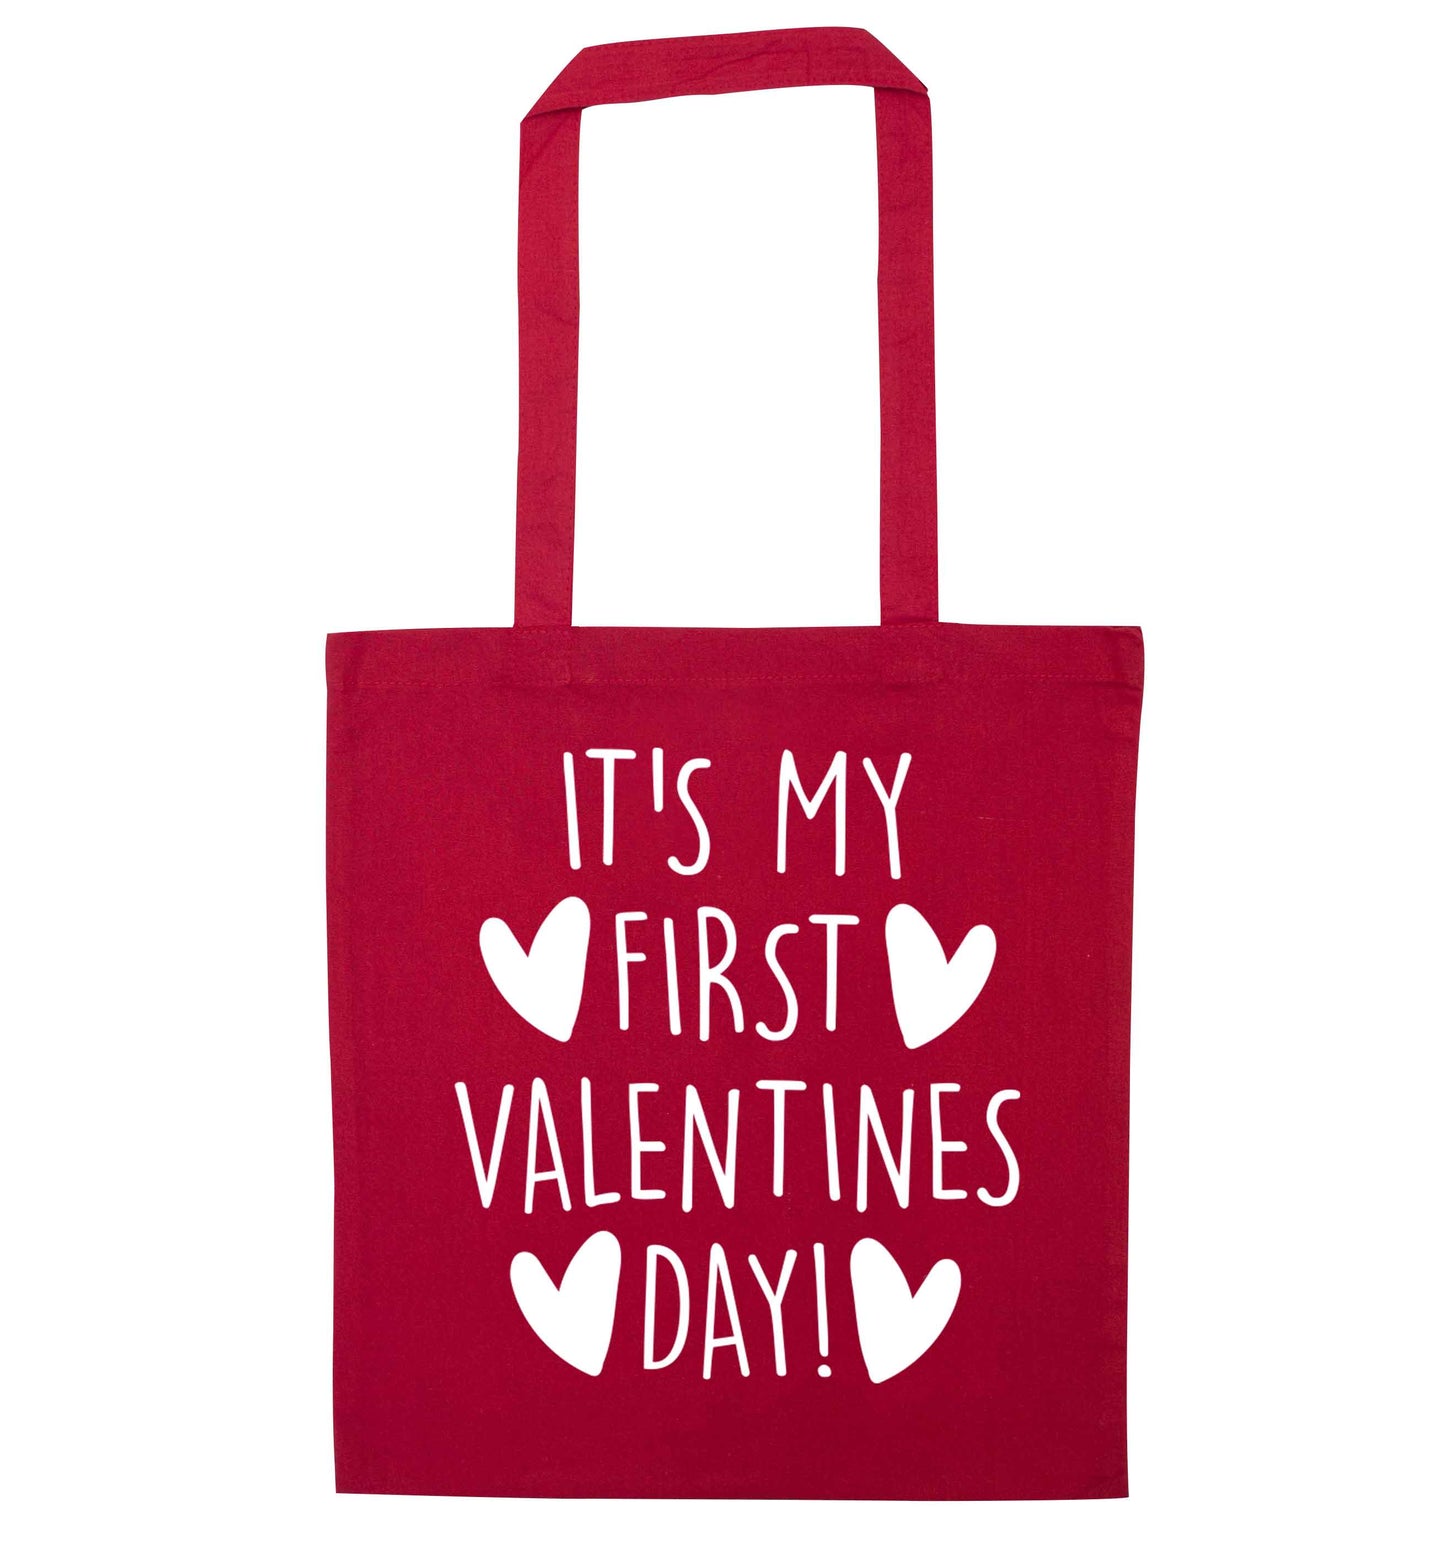 It's my first valentines day! red tote bag